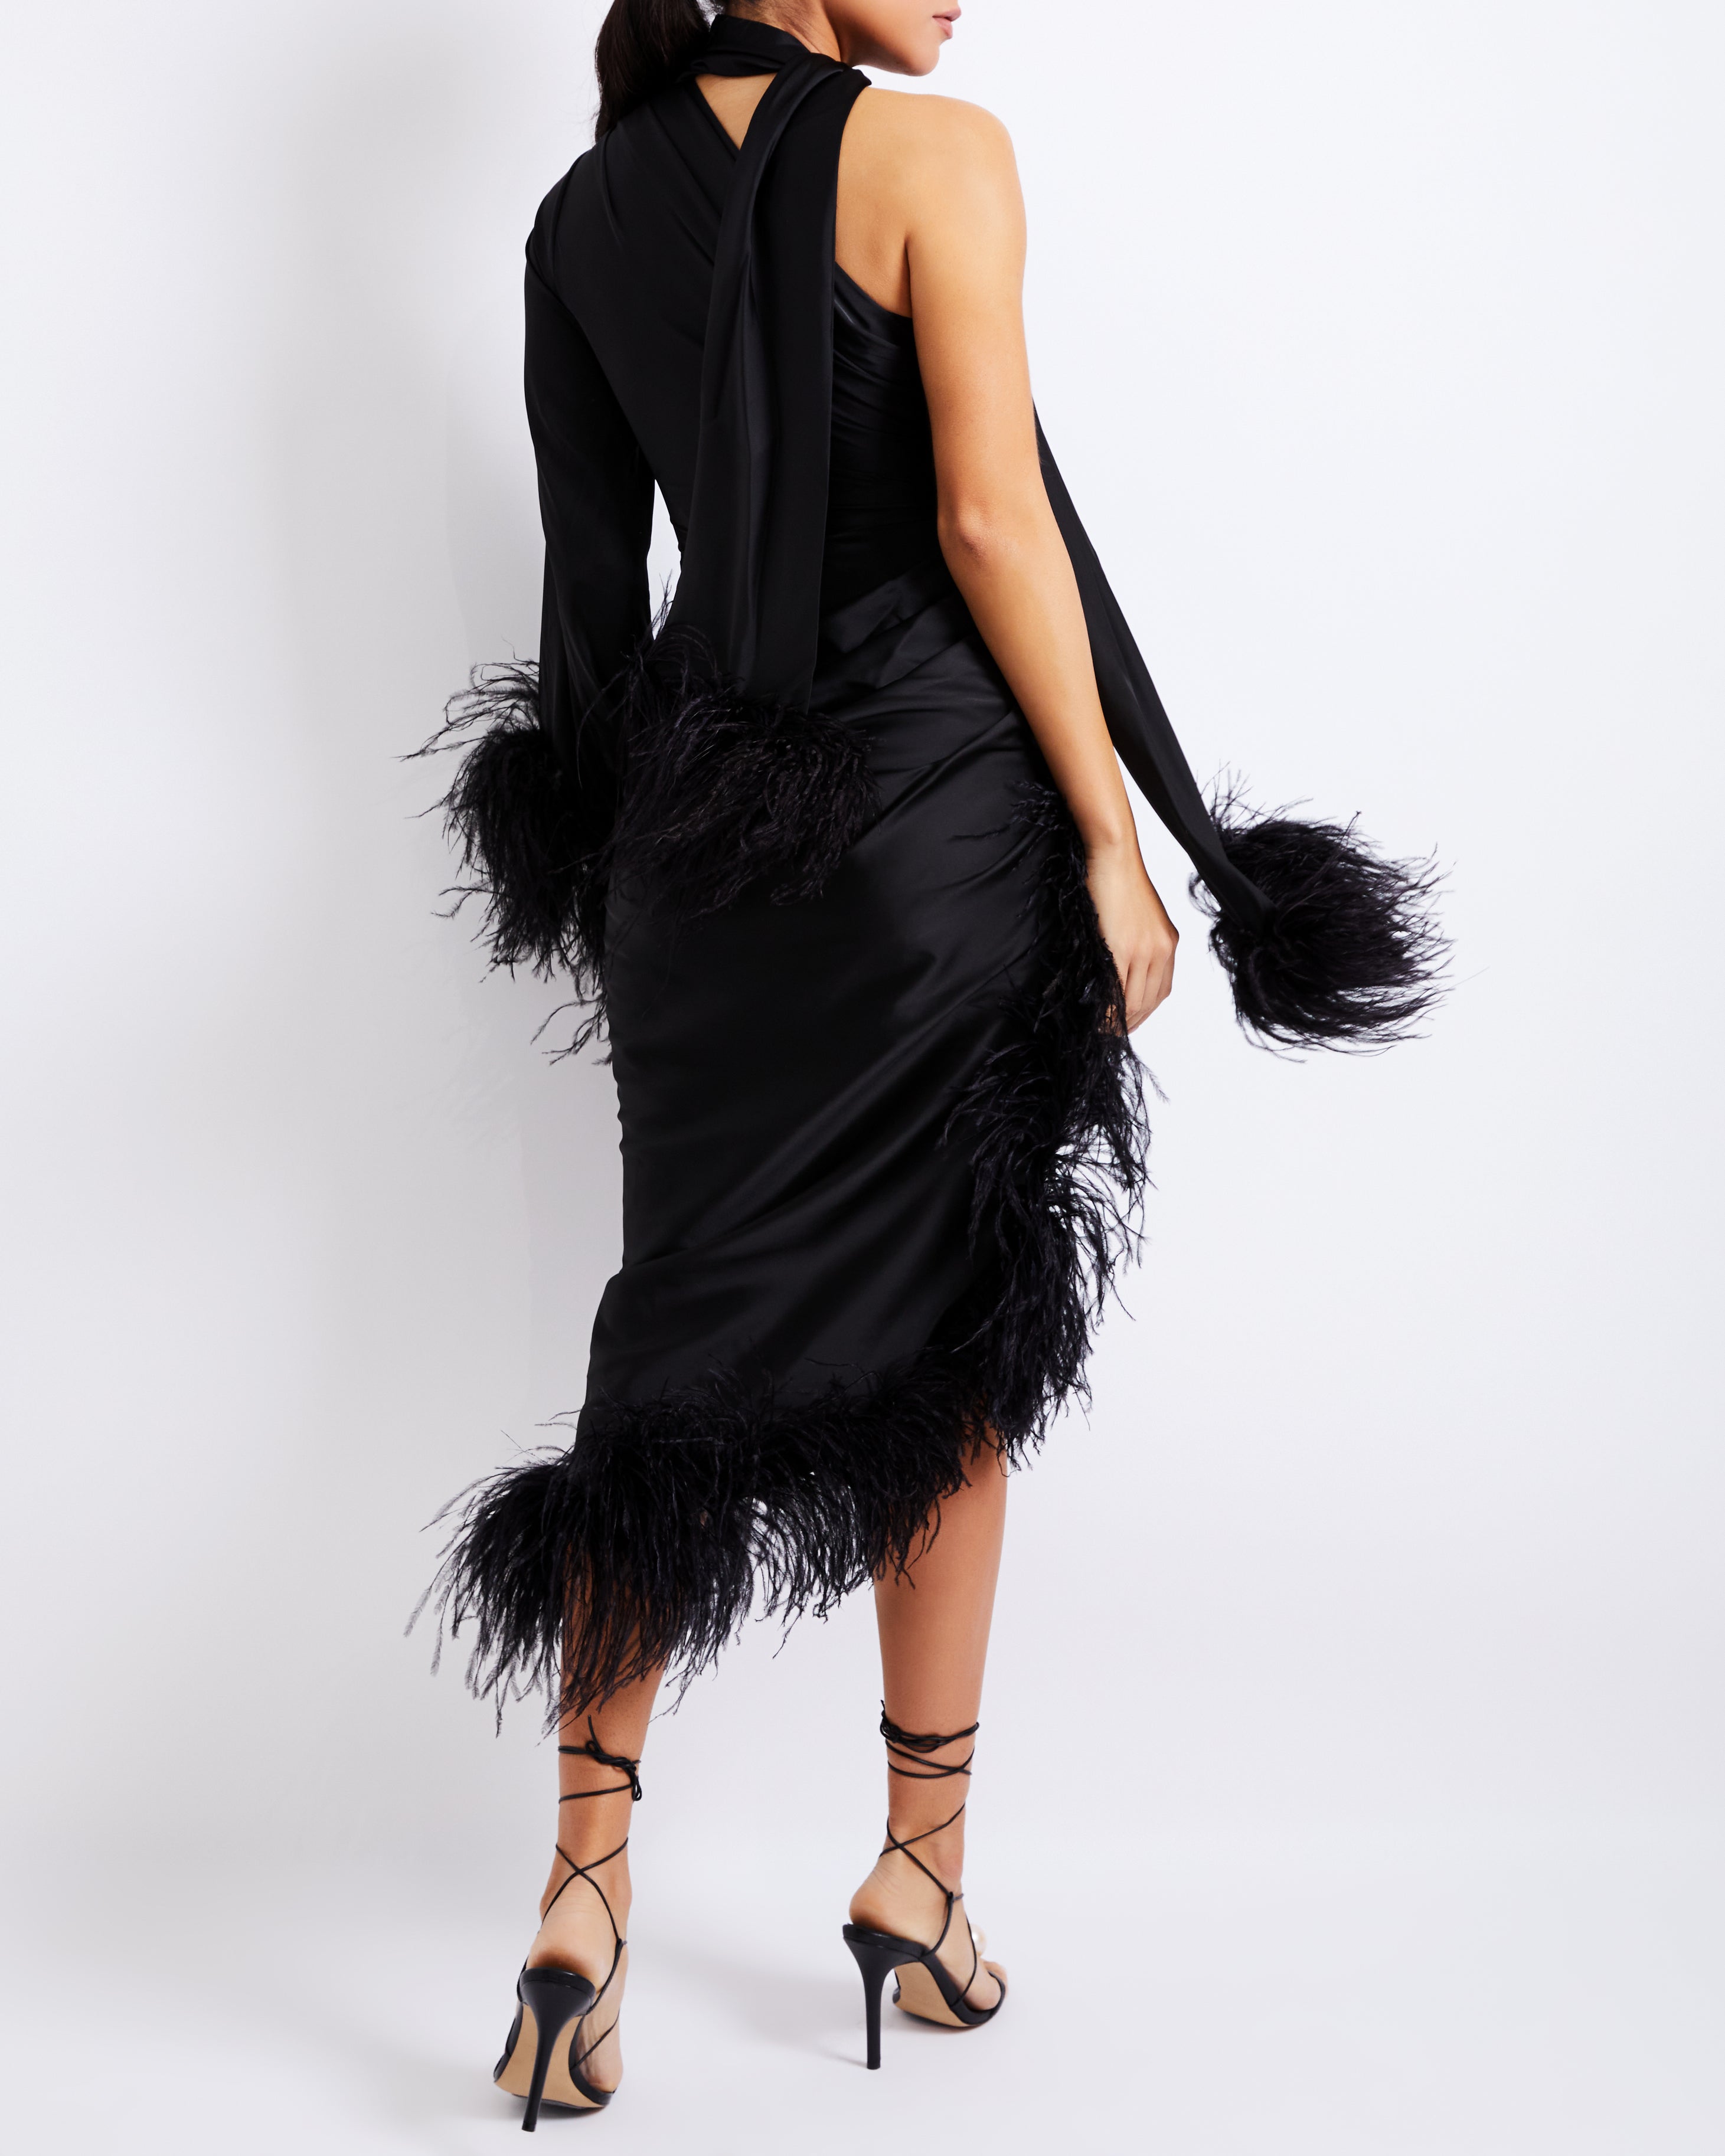 Feather Dress – Todd Patrick Designs